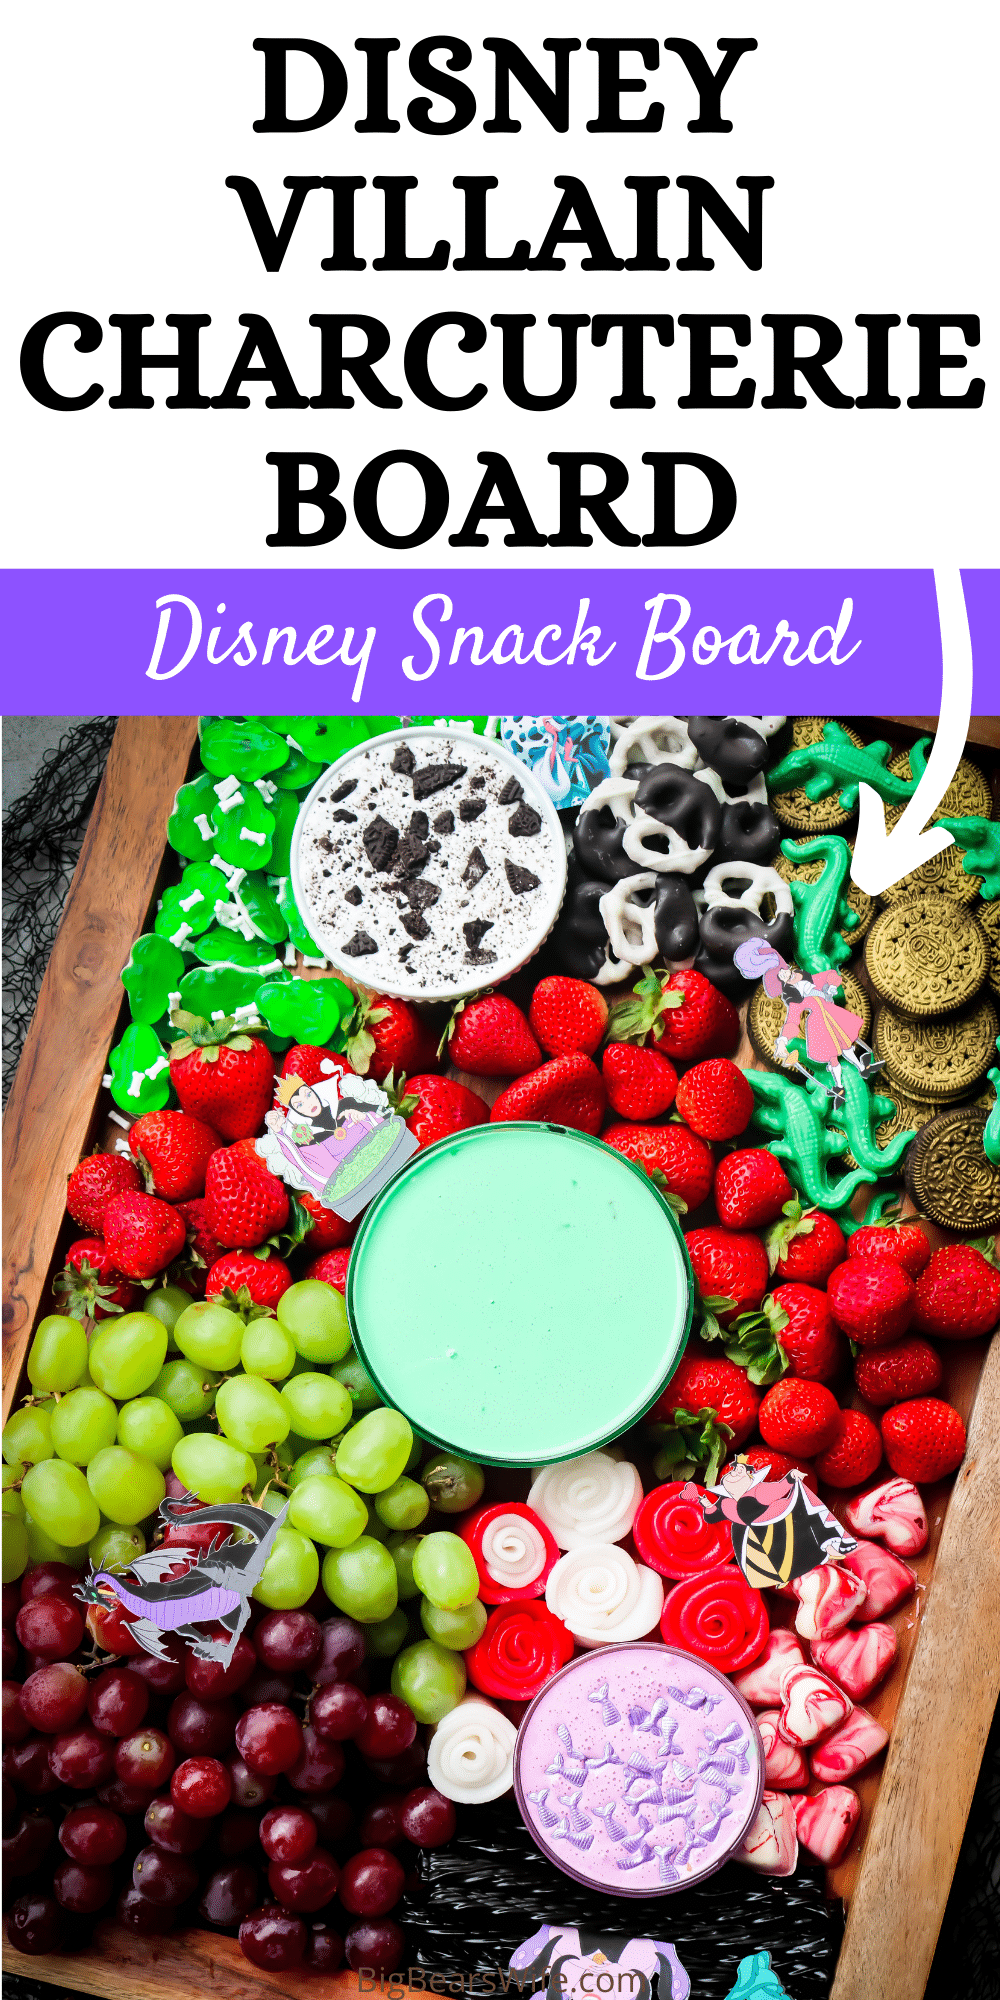 We're celebrating all of the Disney Villains with this Disney Villain Charcuterie Board! It is a fun Disney Snack board to celebrate our favorite Villains for Halloween! via @bigbearswife